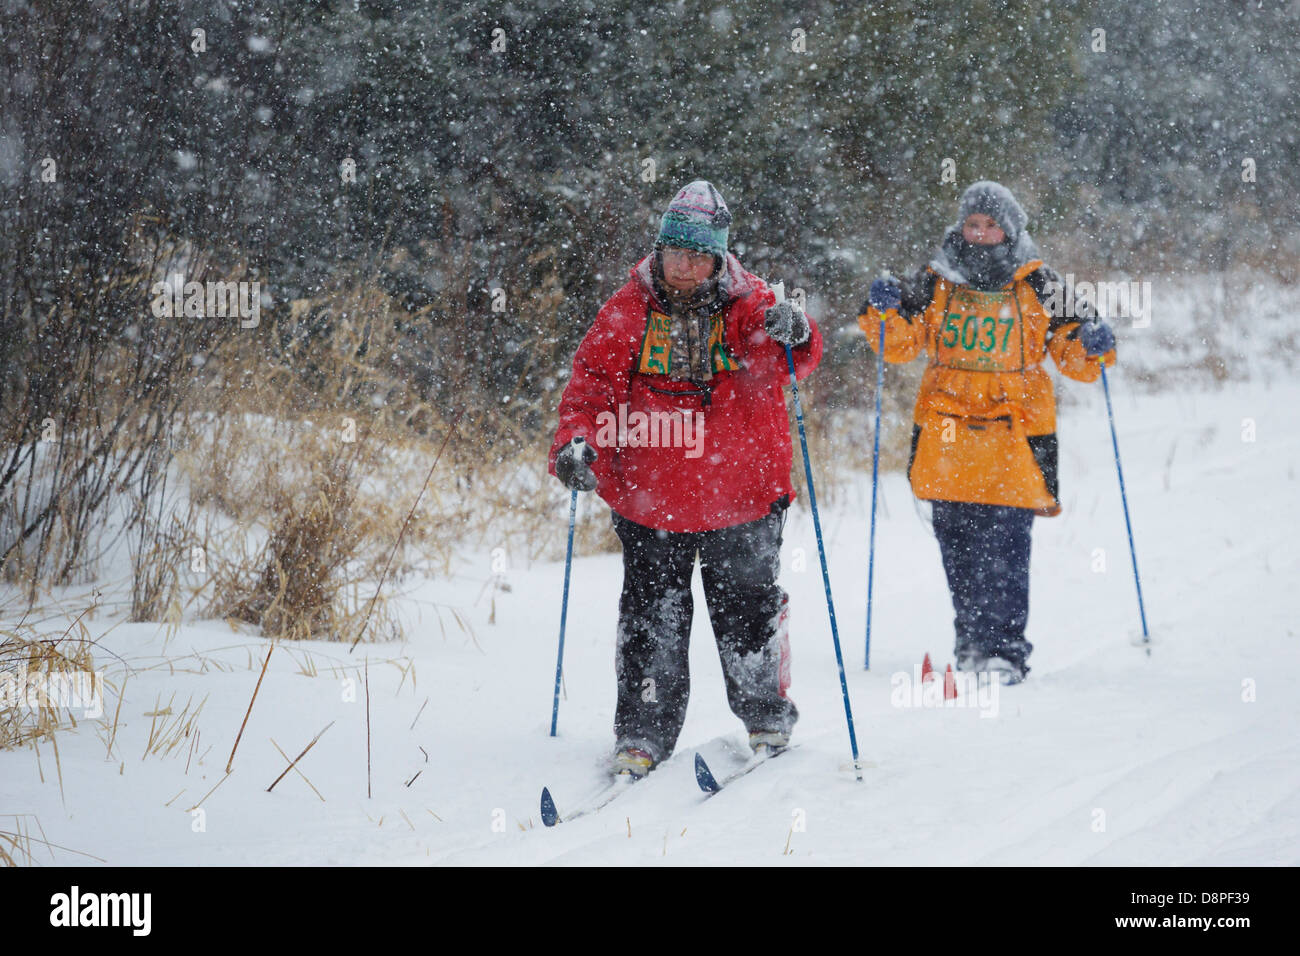 Two skiers ski in the Mora Vasaloppet during a snowstorm on February 10, 2013 near Mora, Minnesota. Stock Photo